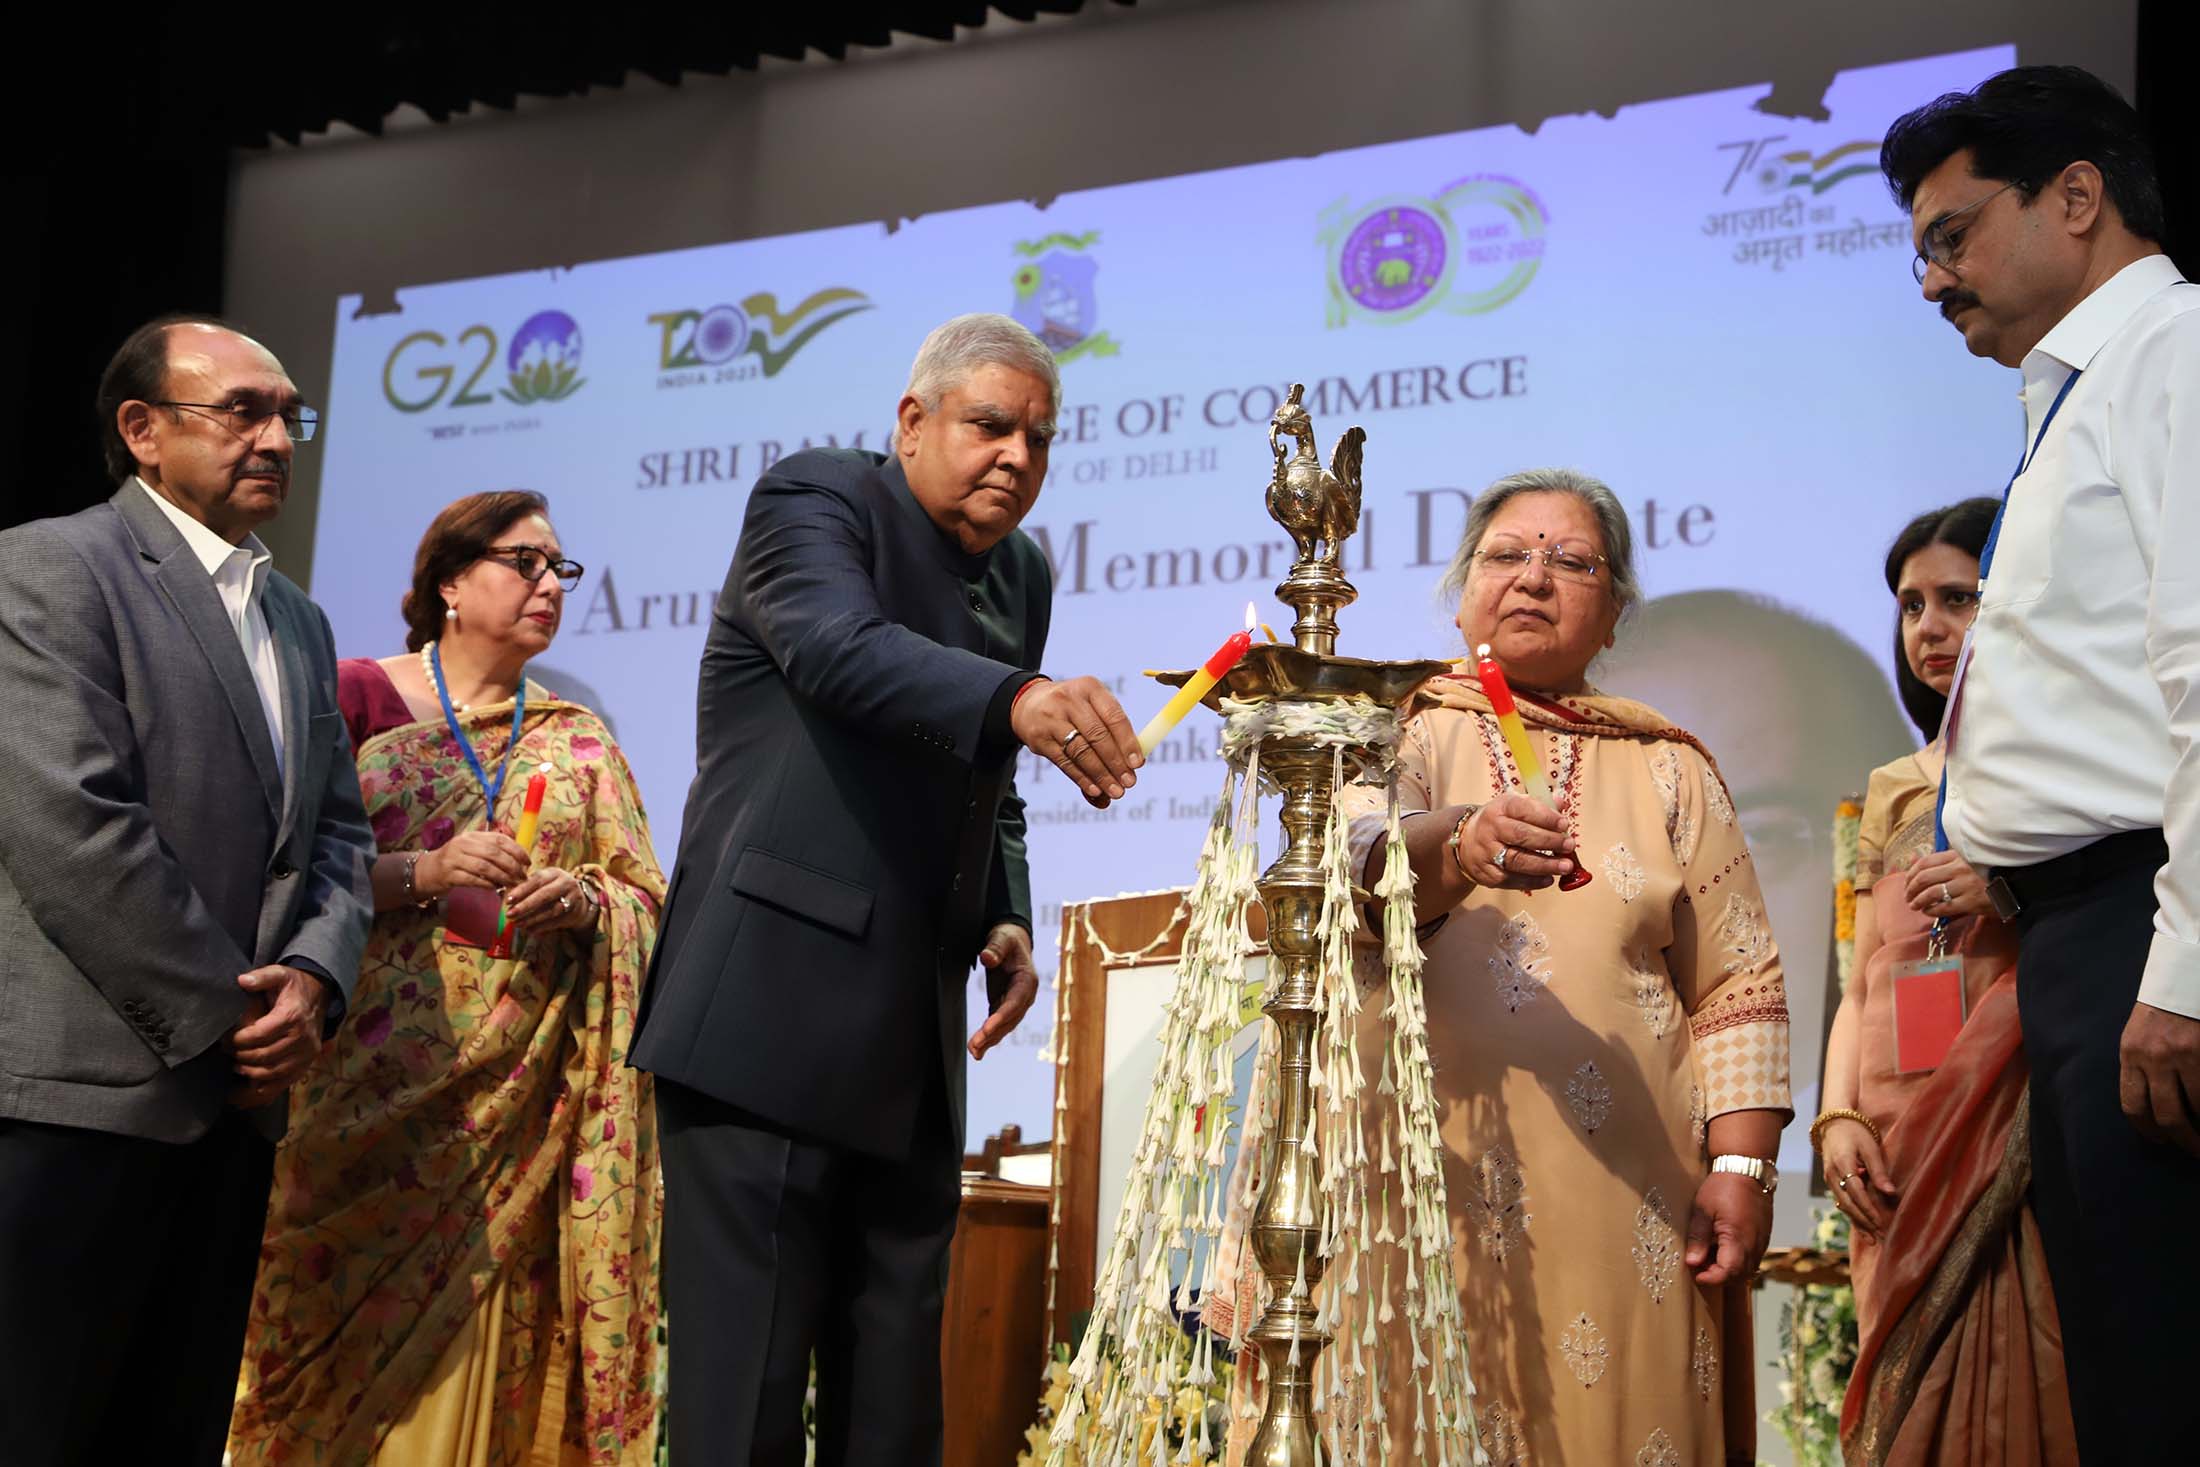 The Vice President, Shri Jagdeep Dhankhar inaugurating the Award Ceremony of the 1st Arun Jaitley Memorial Debate with the lighting of a lamp at Shri Ram College of Commerce, University of Delhi on April 26, 2023.